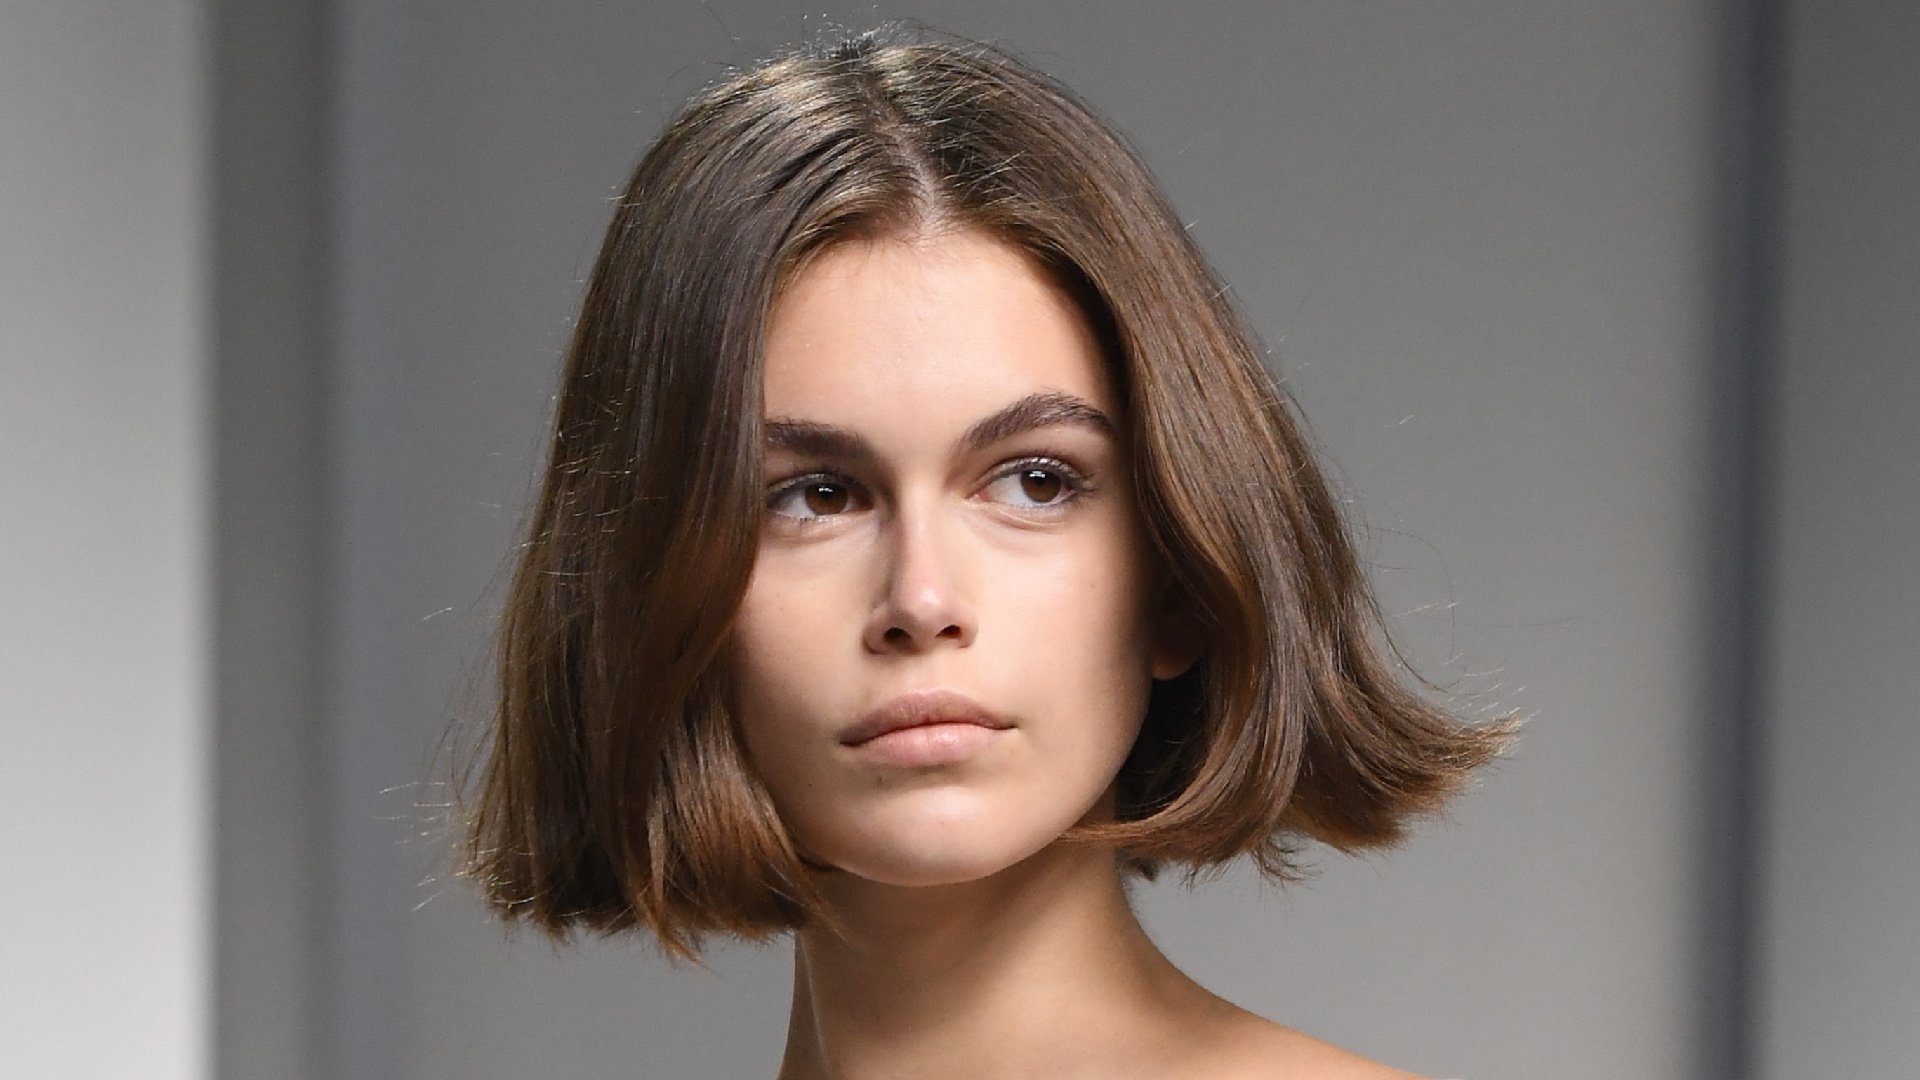 Italian bob haircut: the chic, '60s-inspired style explained | Woman & Home